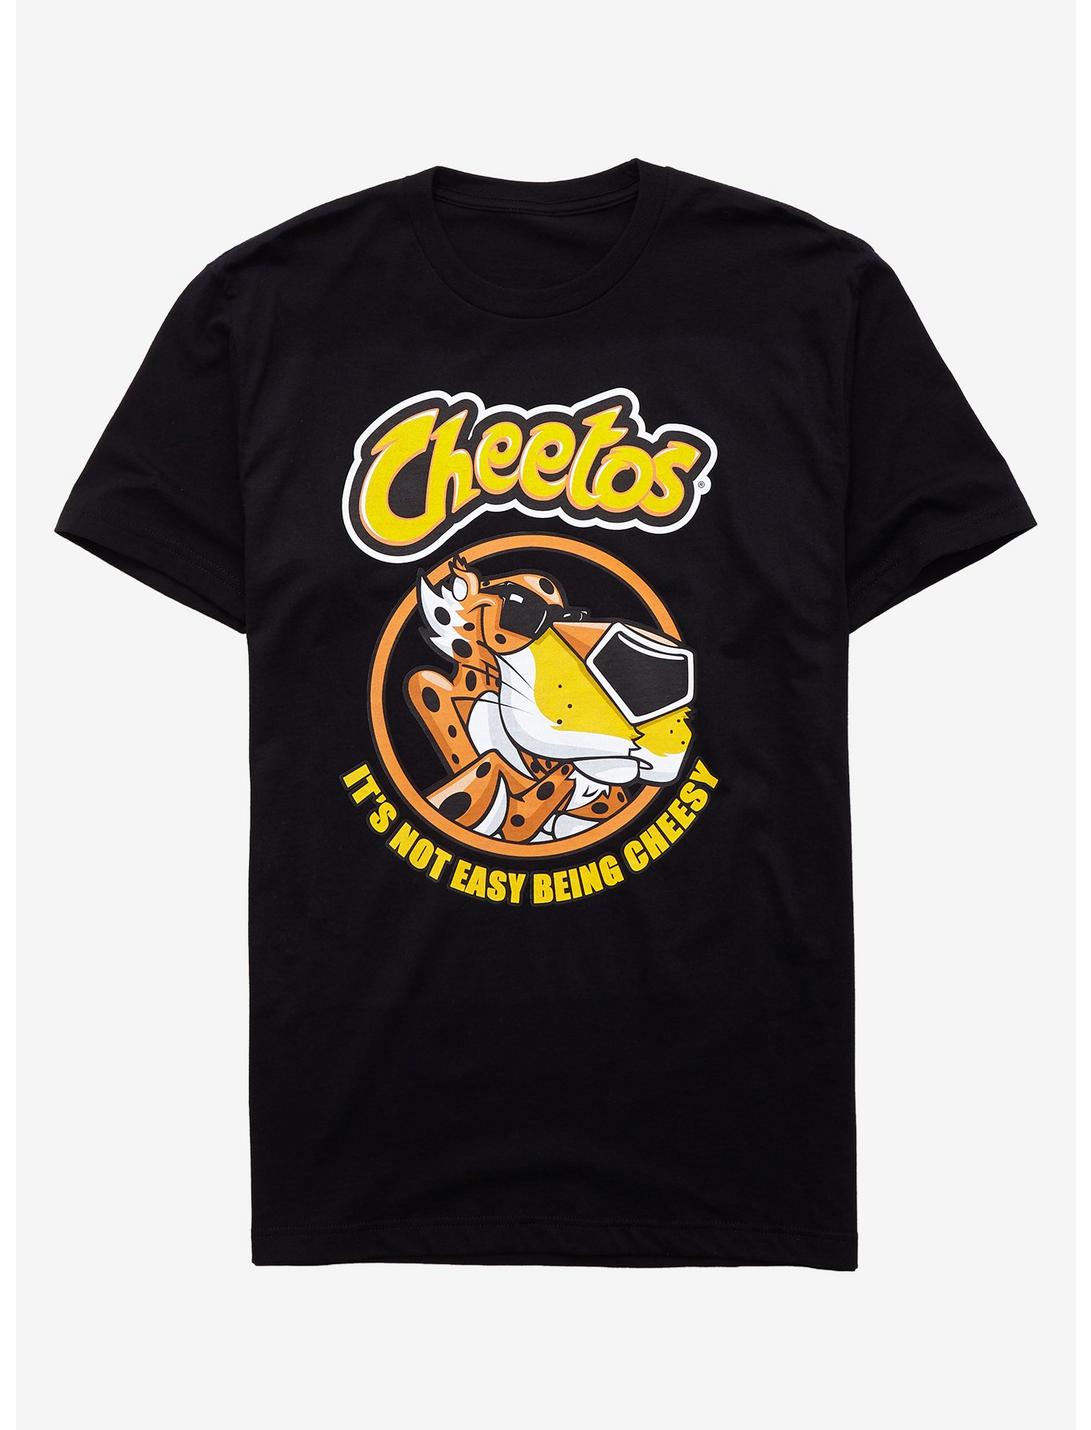 Cheetos It's Not Easy Being Cheesy T-Shirt, BLACK, hi-res